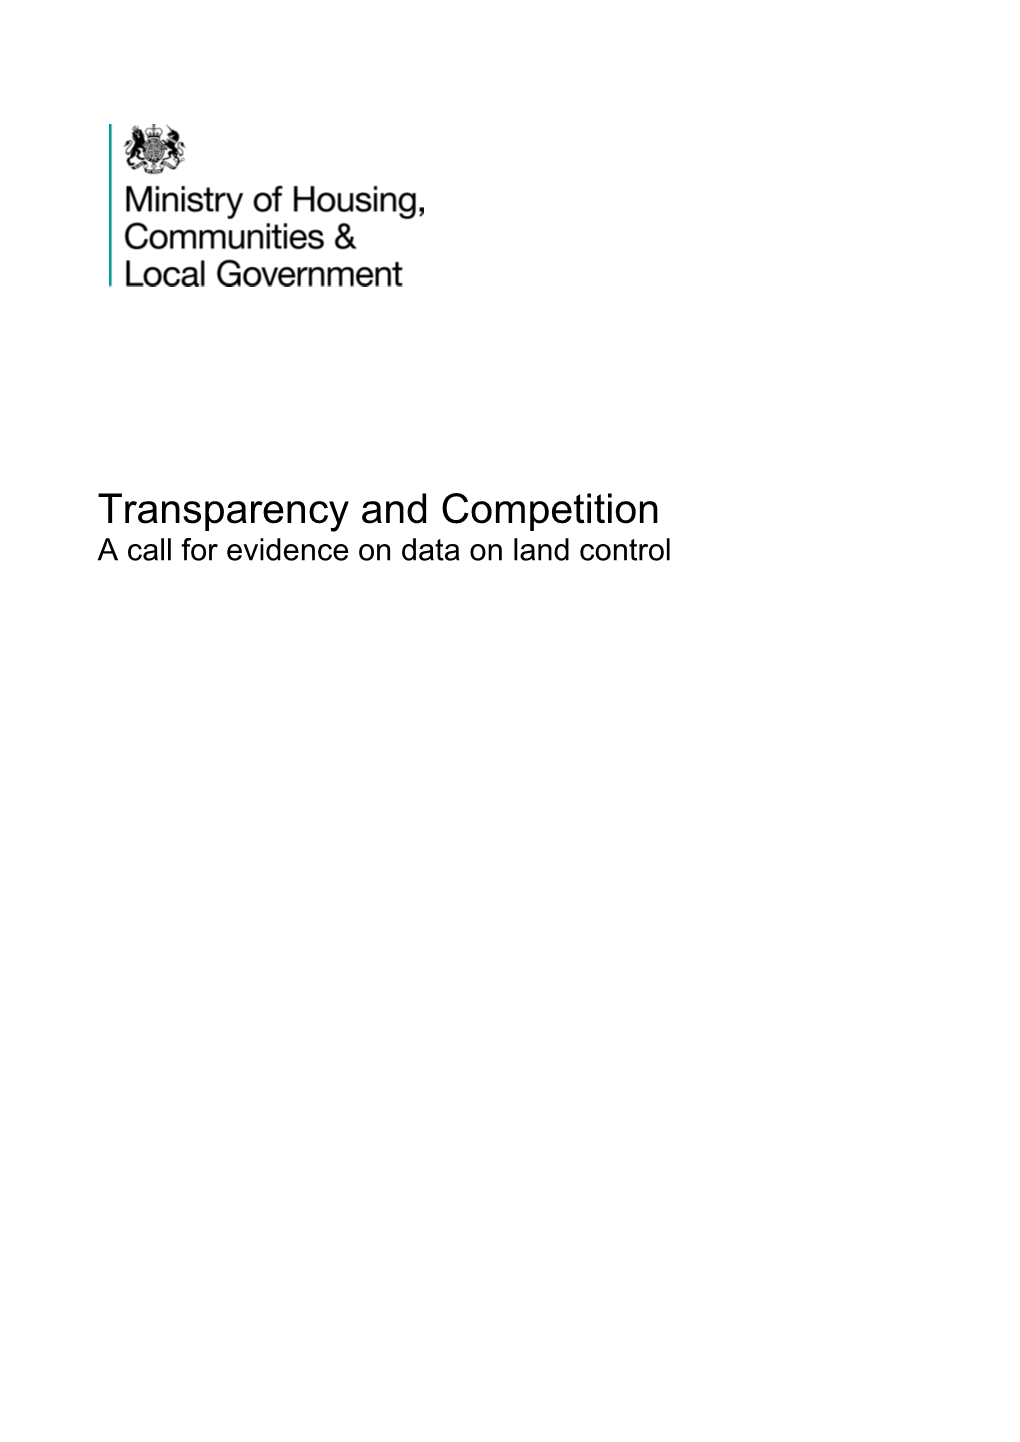 Transparency and Competition: a Call for Evidence on Data on Land Control